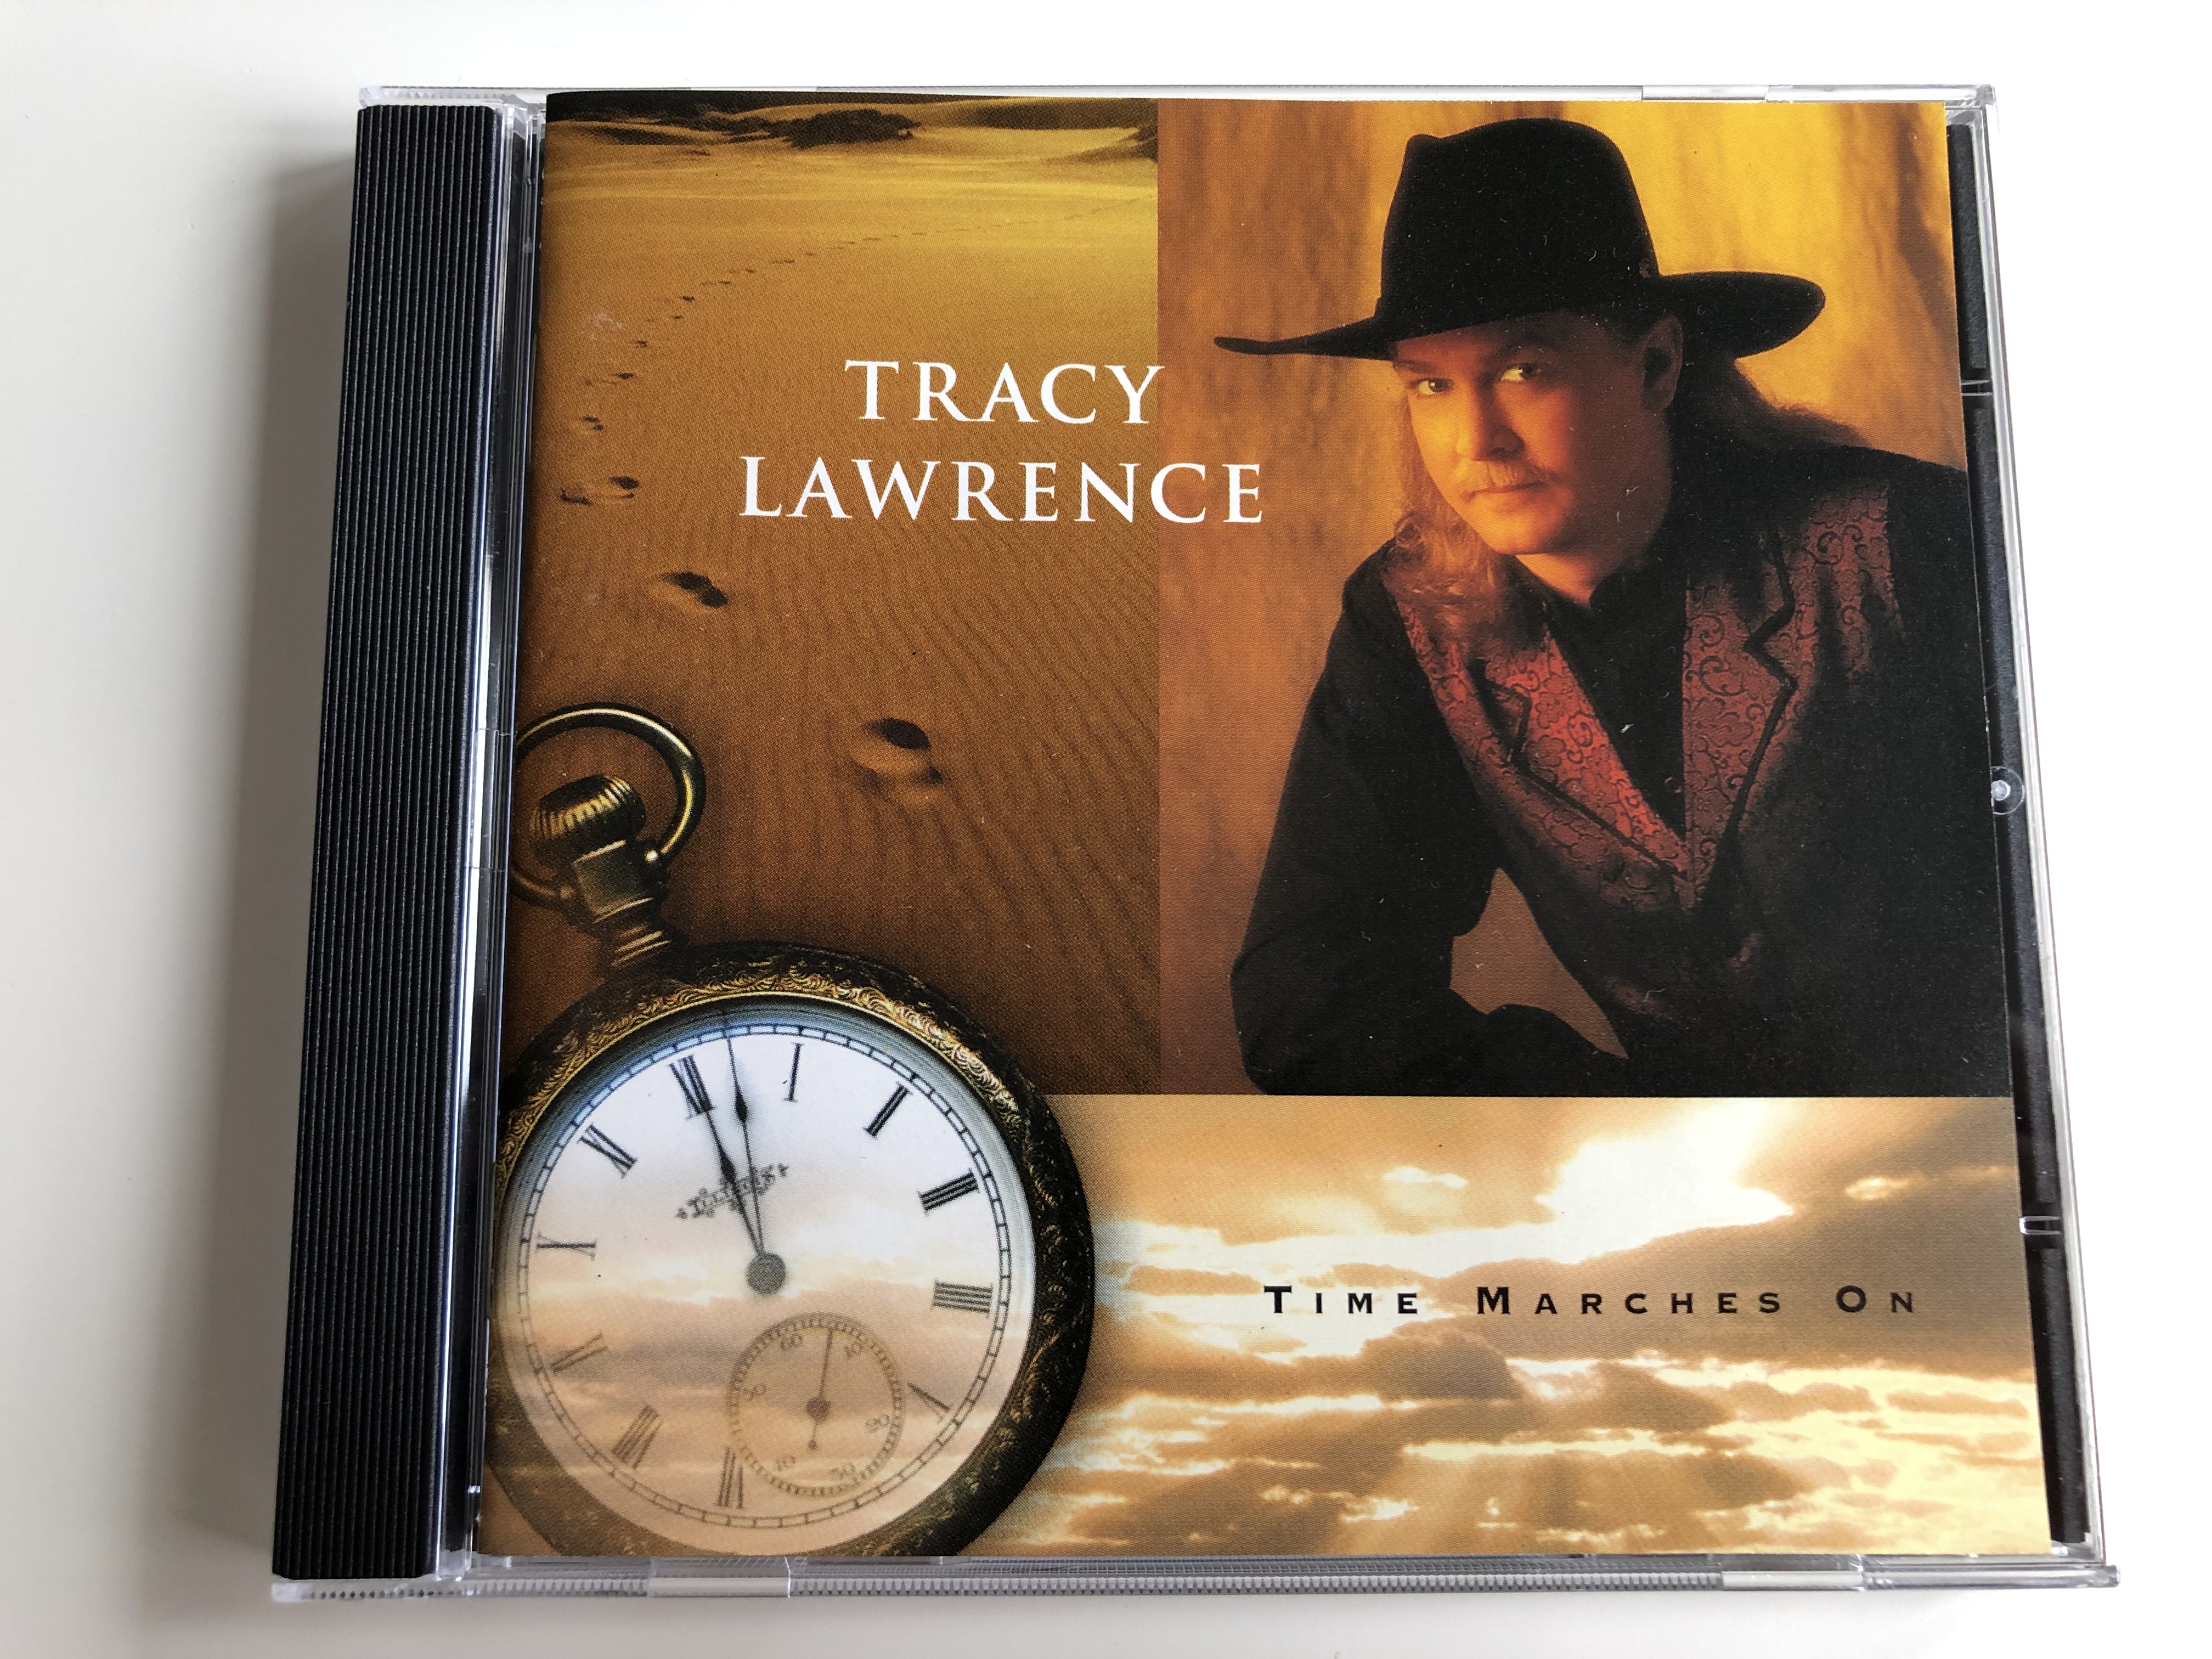 tracy-lawrence-time-marches-ontracy-lawrence-time-meaches-onimg-1705.jpg